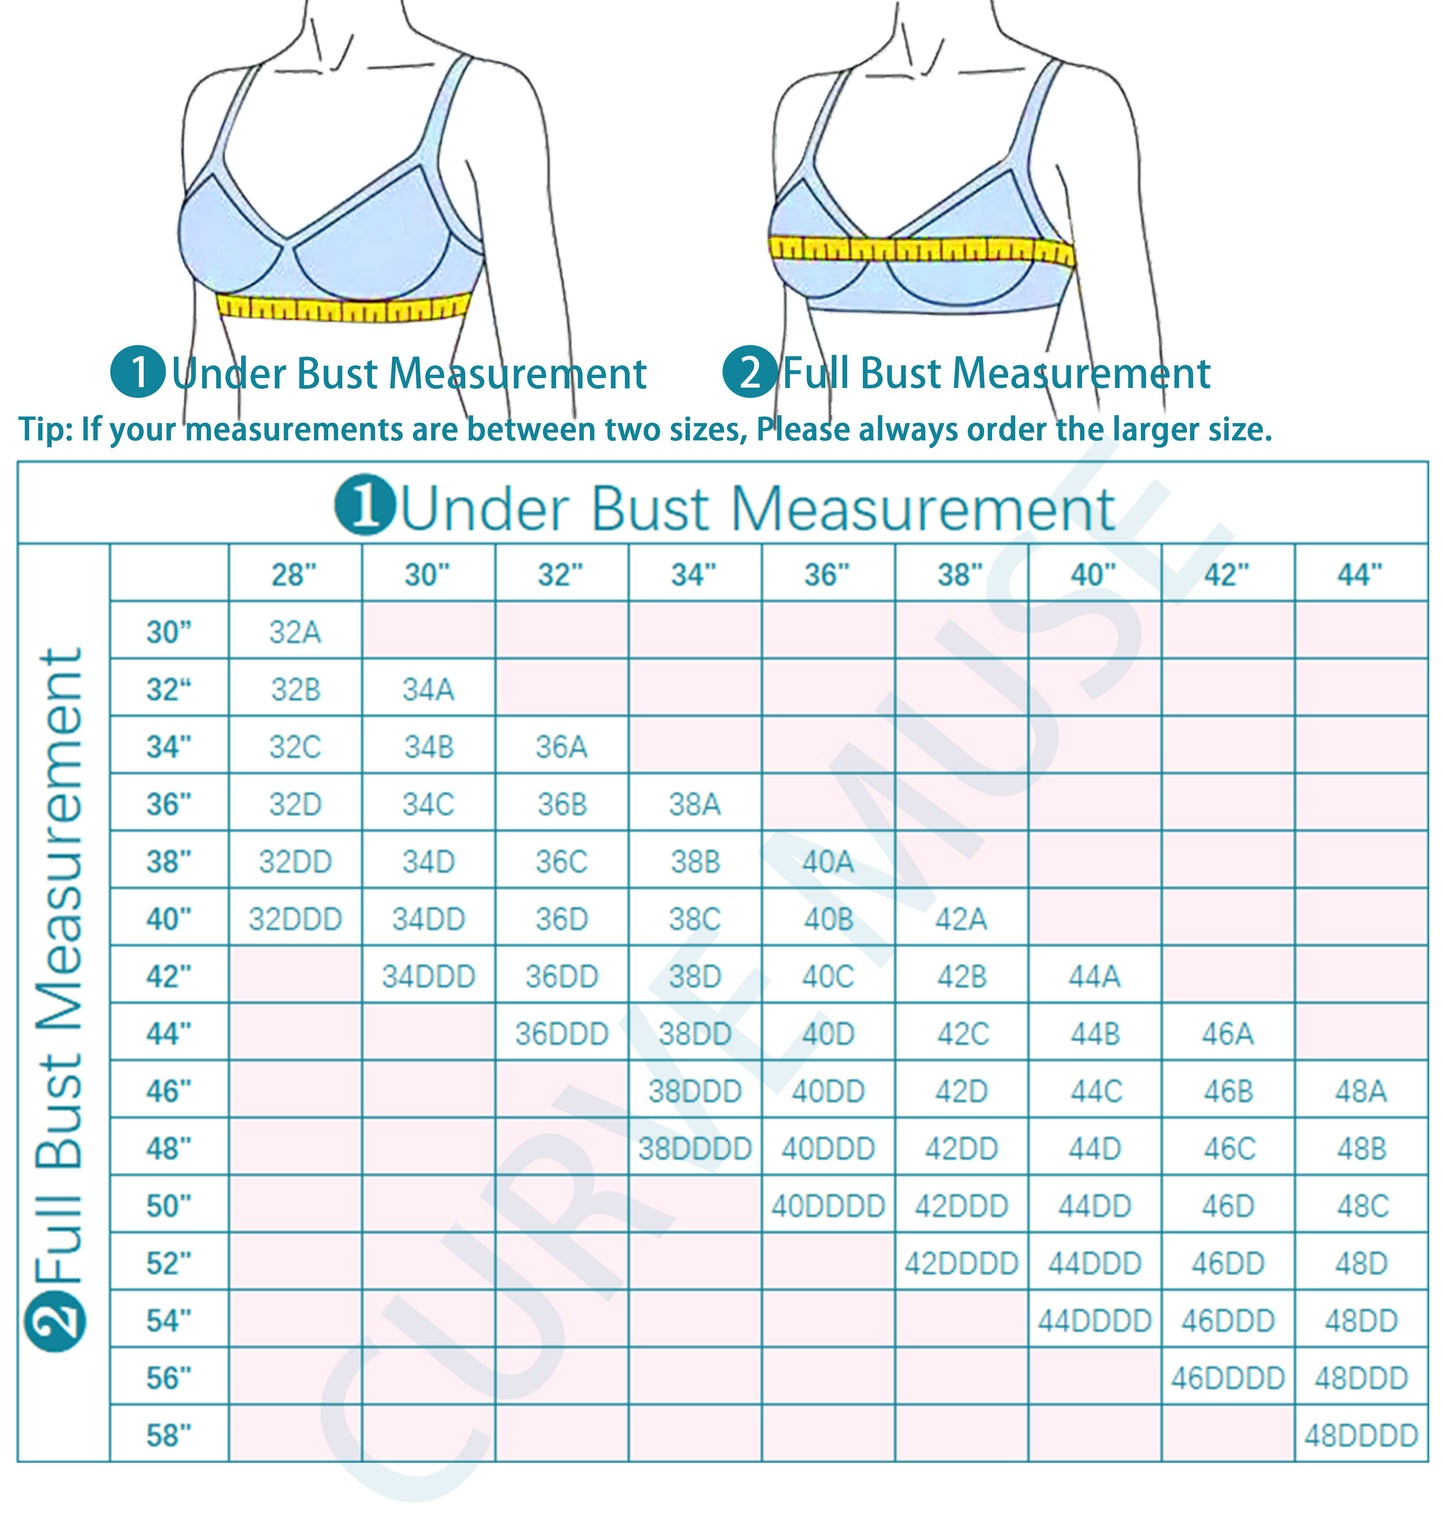 Women's Lightly Padded Underwire Plunge Bra With High Neck Lace-2Pack